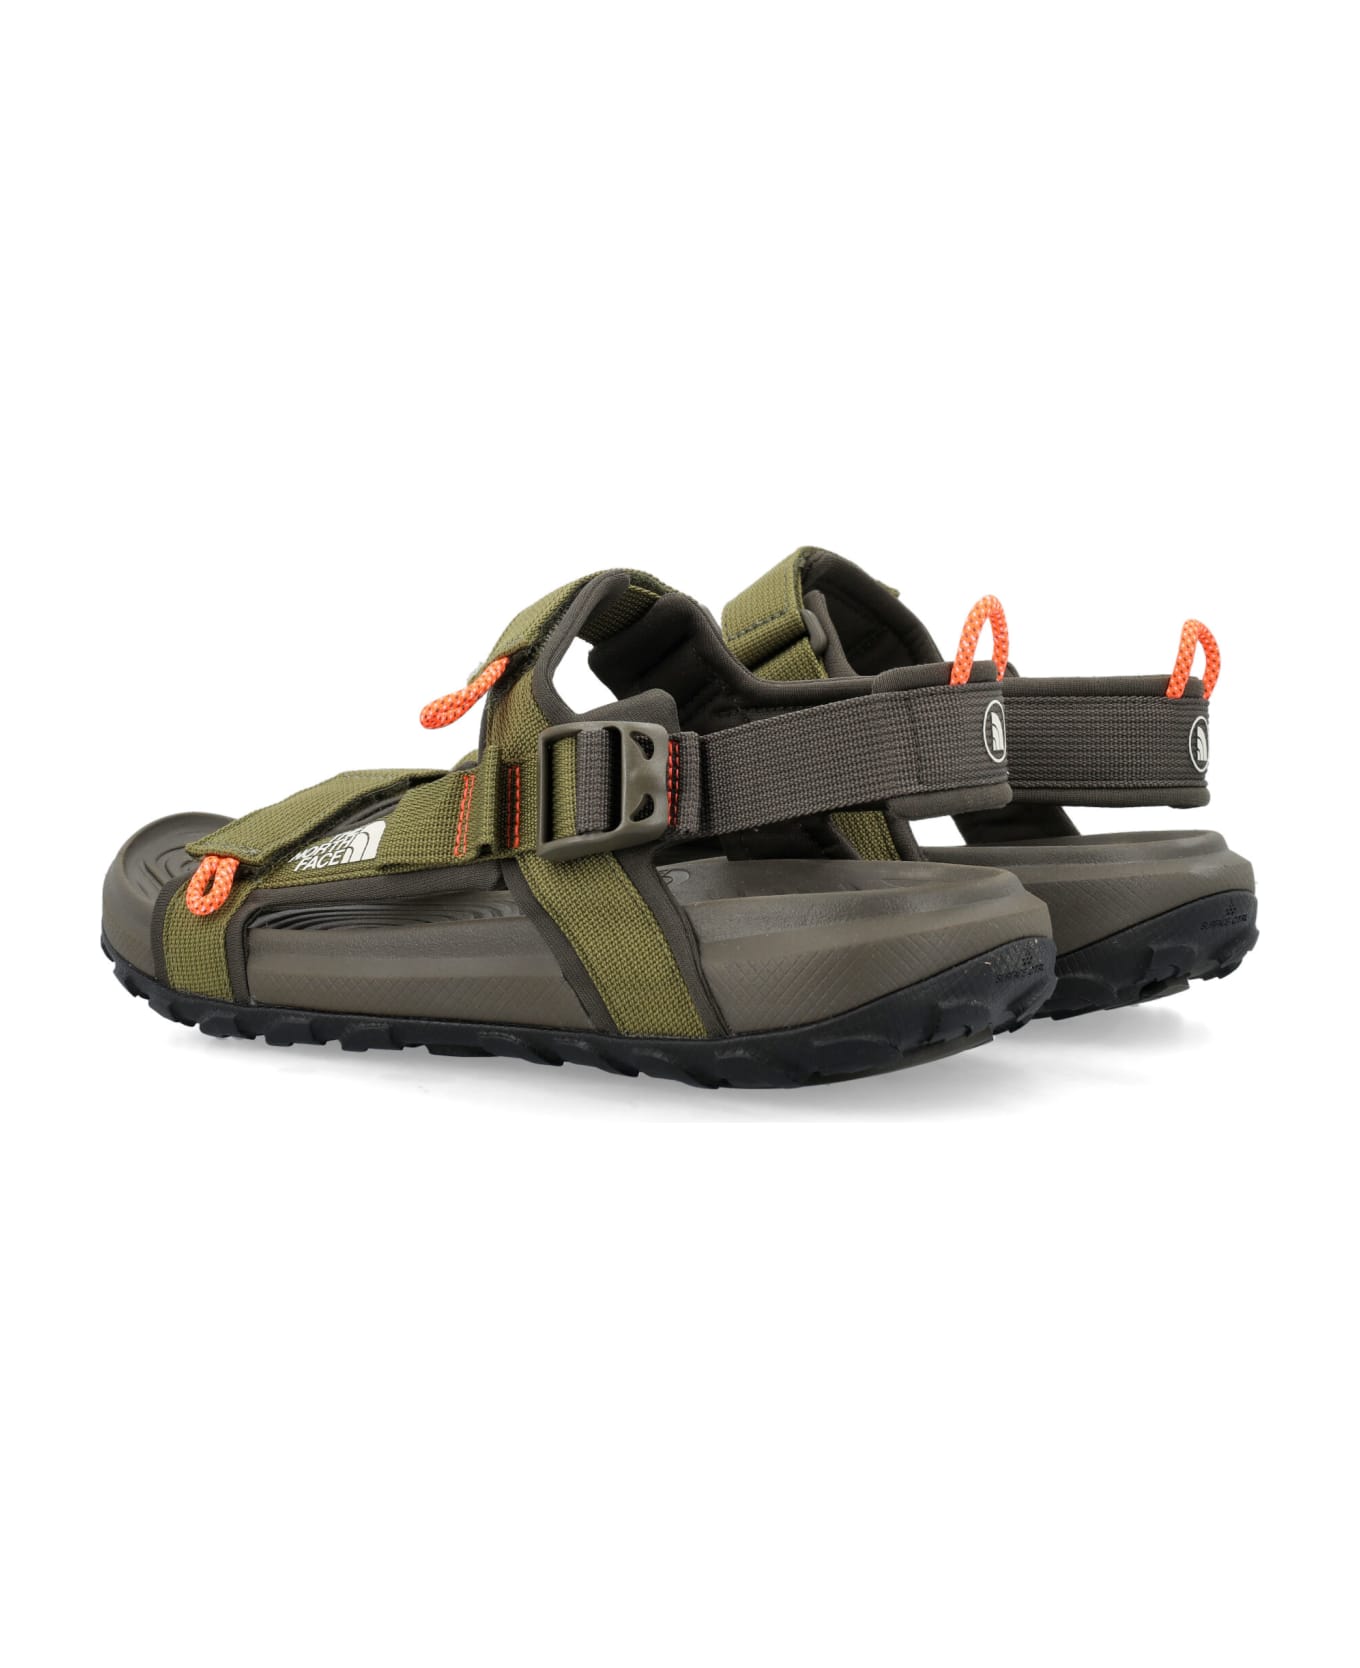 The North Face Explore Camp Sandals - OLIVE